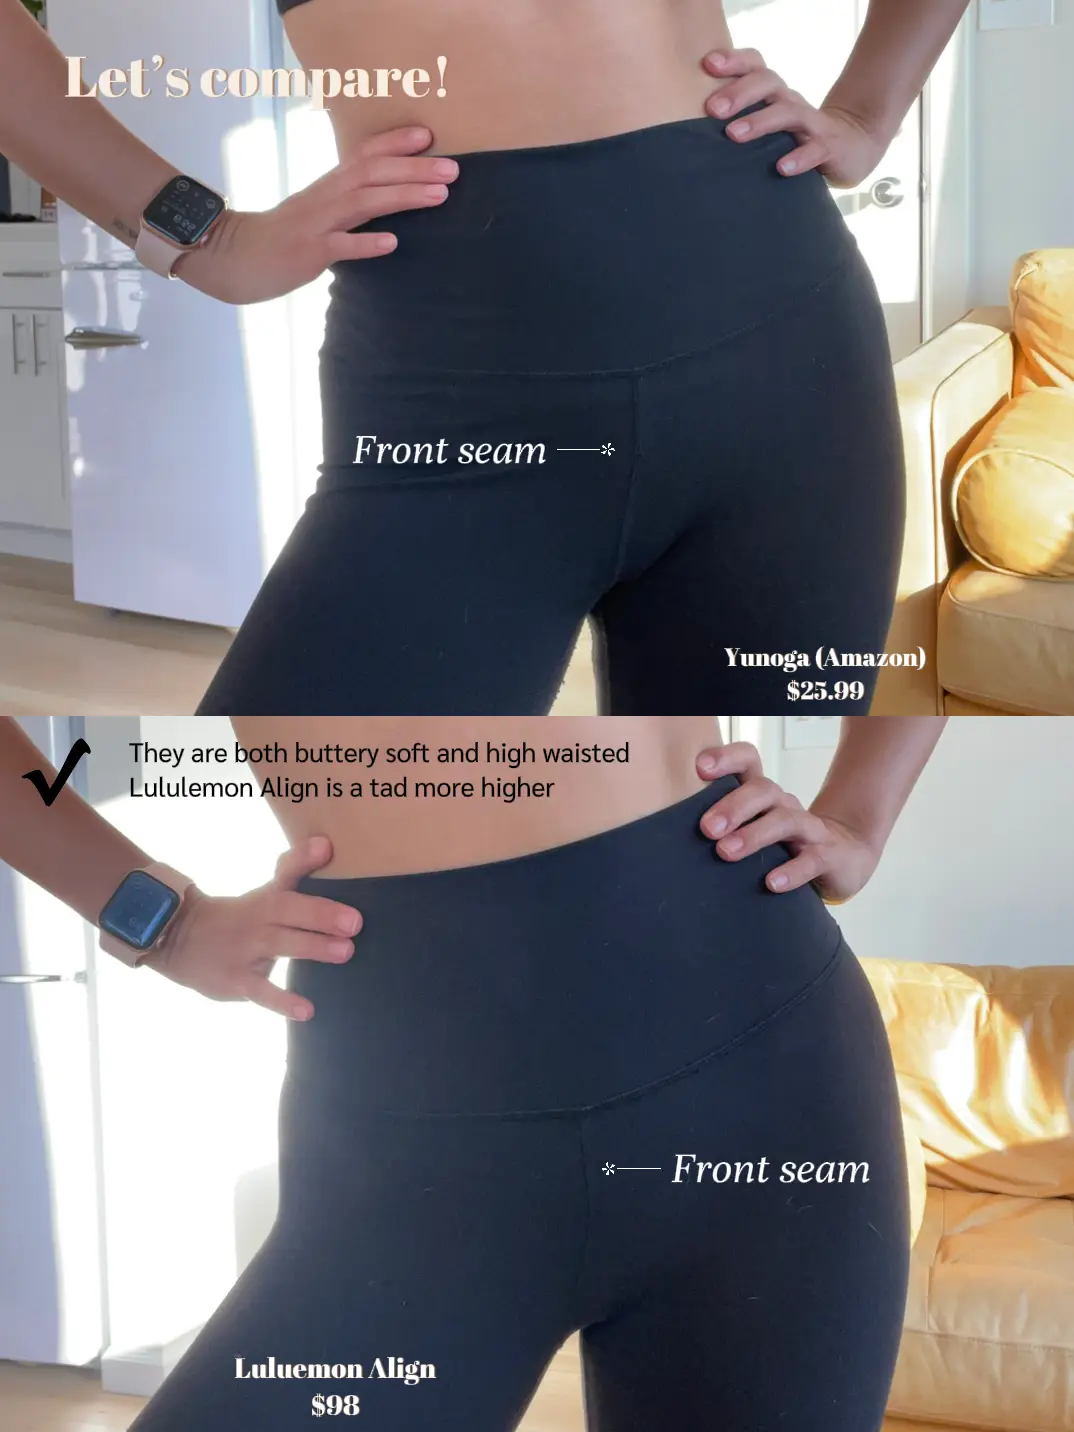 If you've never tried them here's my detailed recap of NVGTN leggings